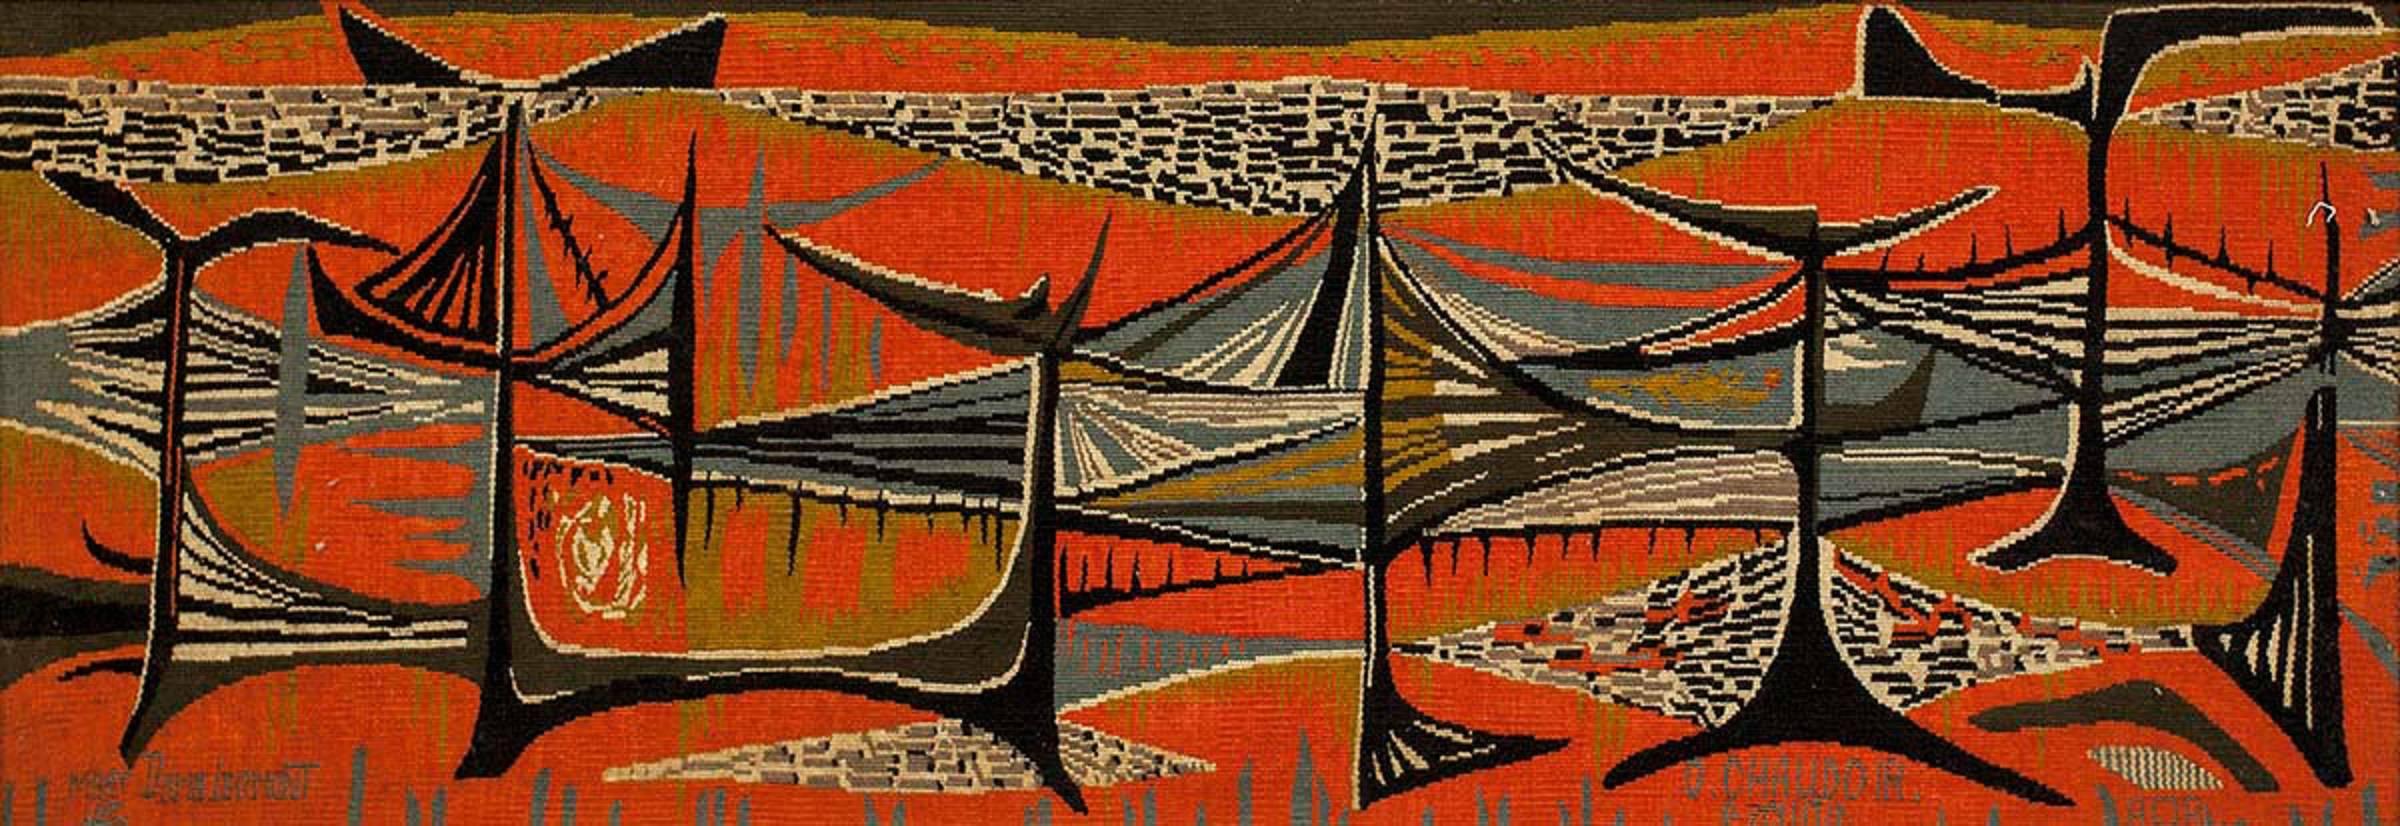 This is a Mary Dambiermont (Belgian, 1932-1983) tapestry.
Woven at Ateliers Chaudoir et marque de Bruxelles